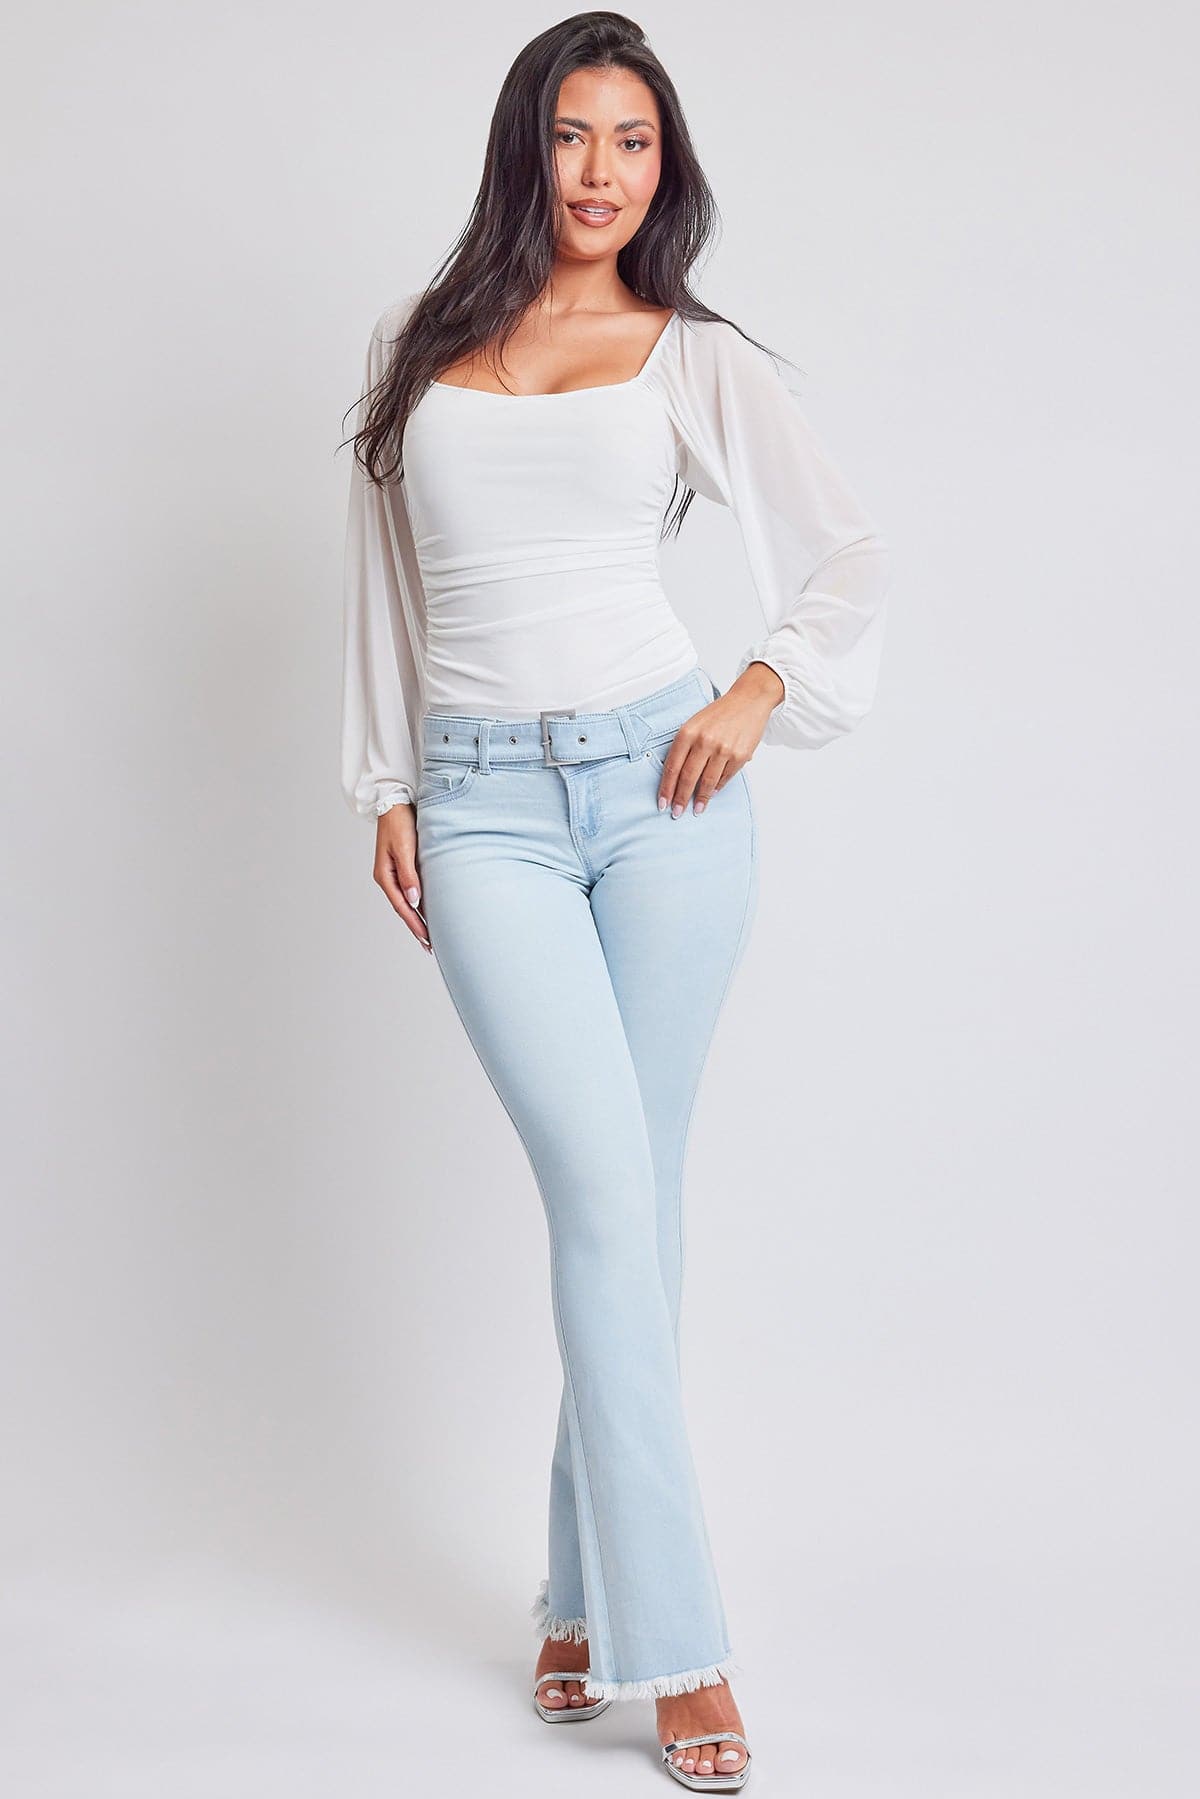 Women's Flare Denim Jeans With Belt Buckle Feature